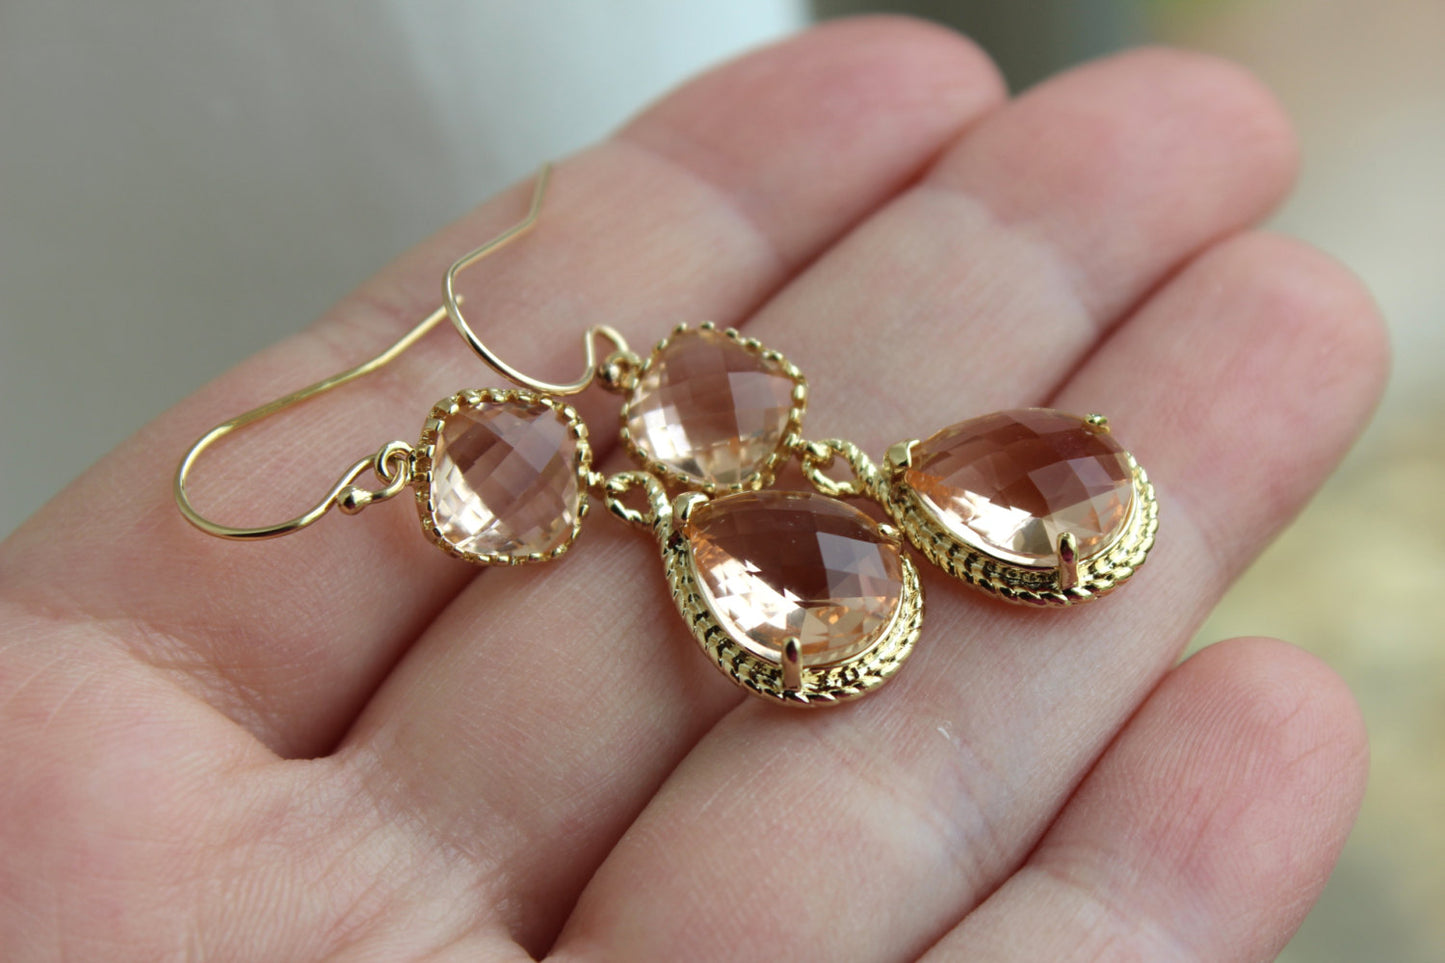 Gold Blush Earrings Two Tiered - Champagne Peach Wedding Jewelry - Pink Blush Bridesmaid Earrings Gift Peach Bridal Jewelry - Gift Under 35